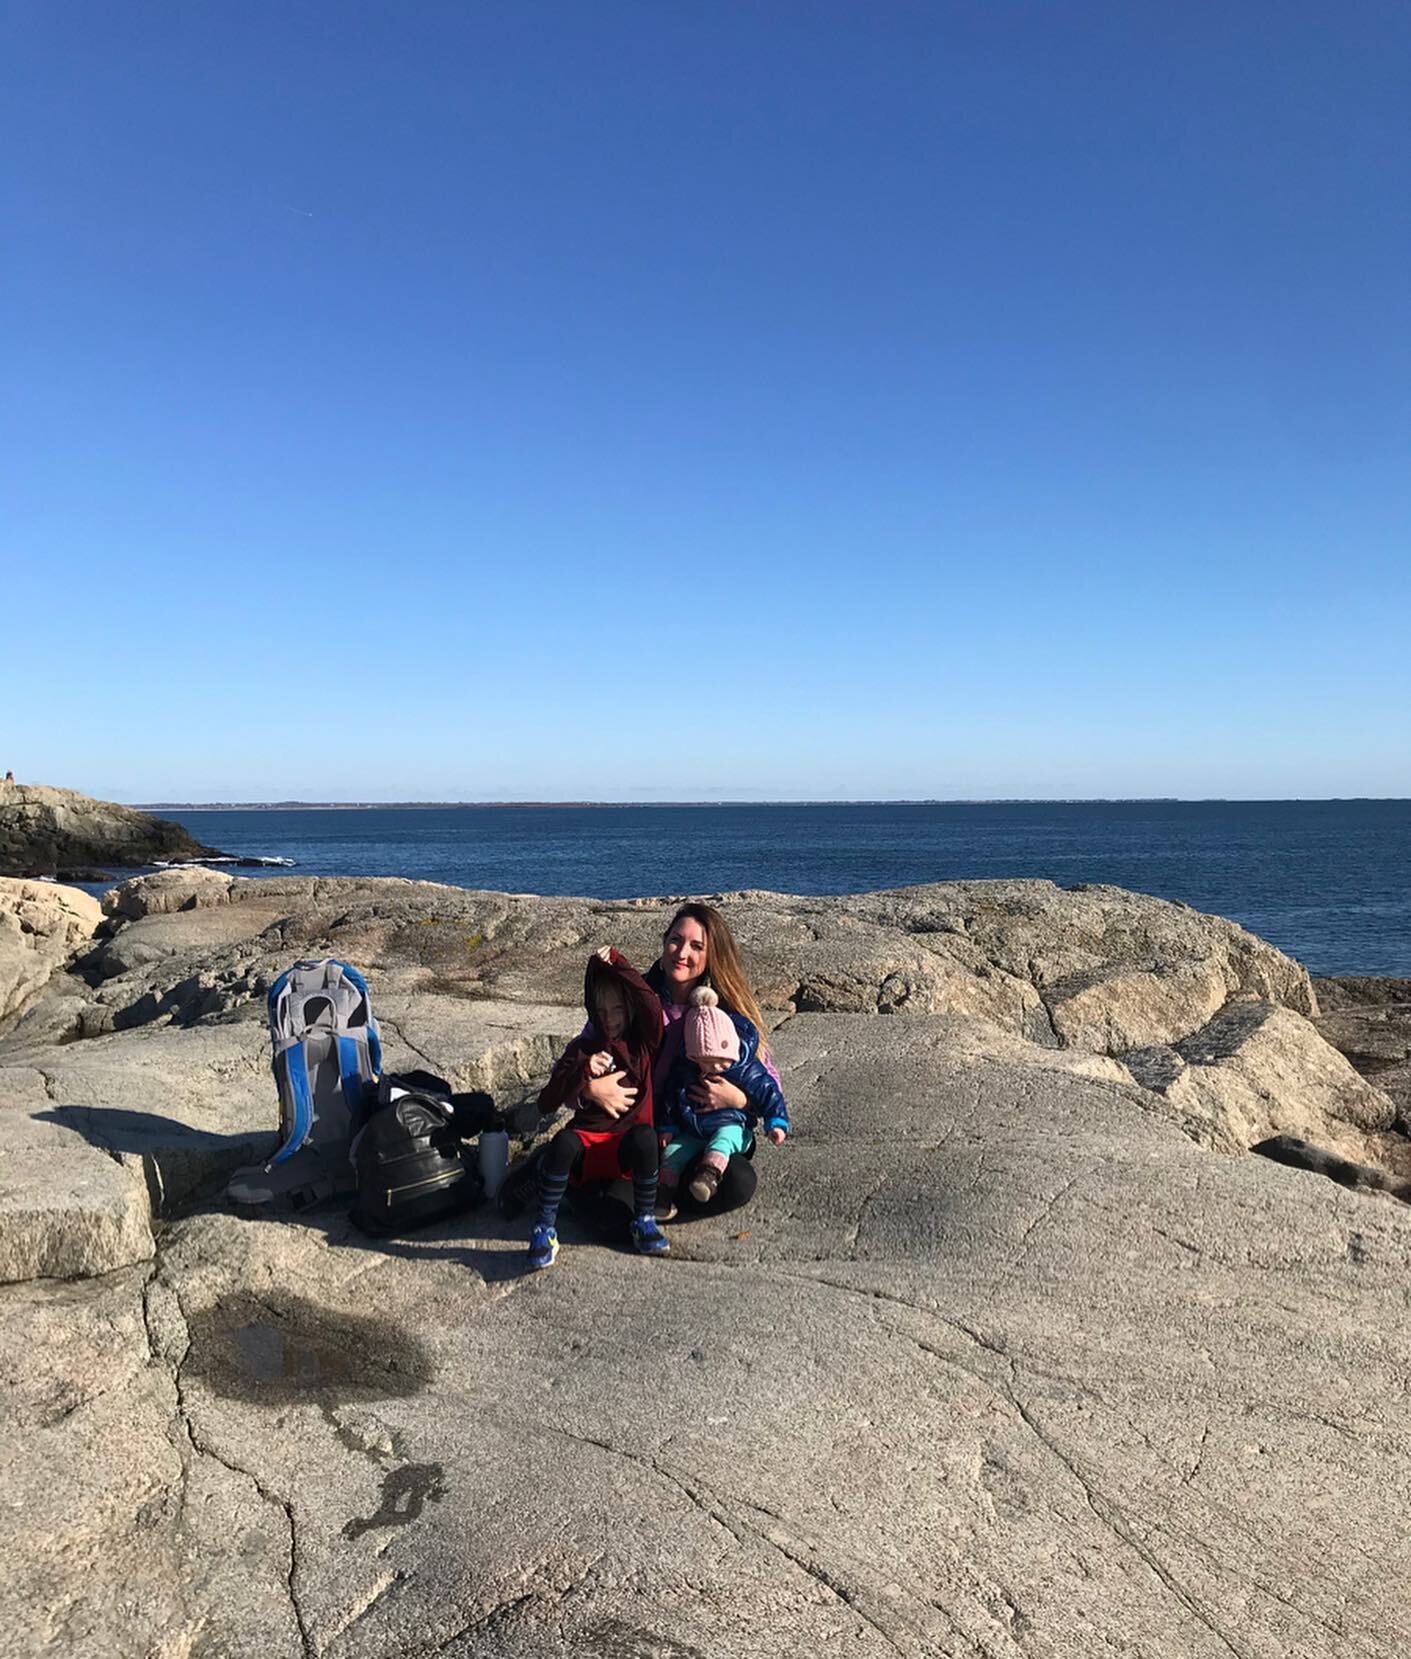 Spent my last day as a 36 year old on a spectacular seaside hike with my loves. ☀️One more turn around the sun for me, I am so very very grateful for it all!💙